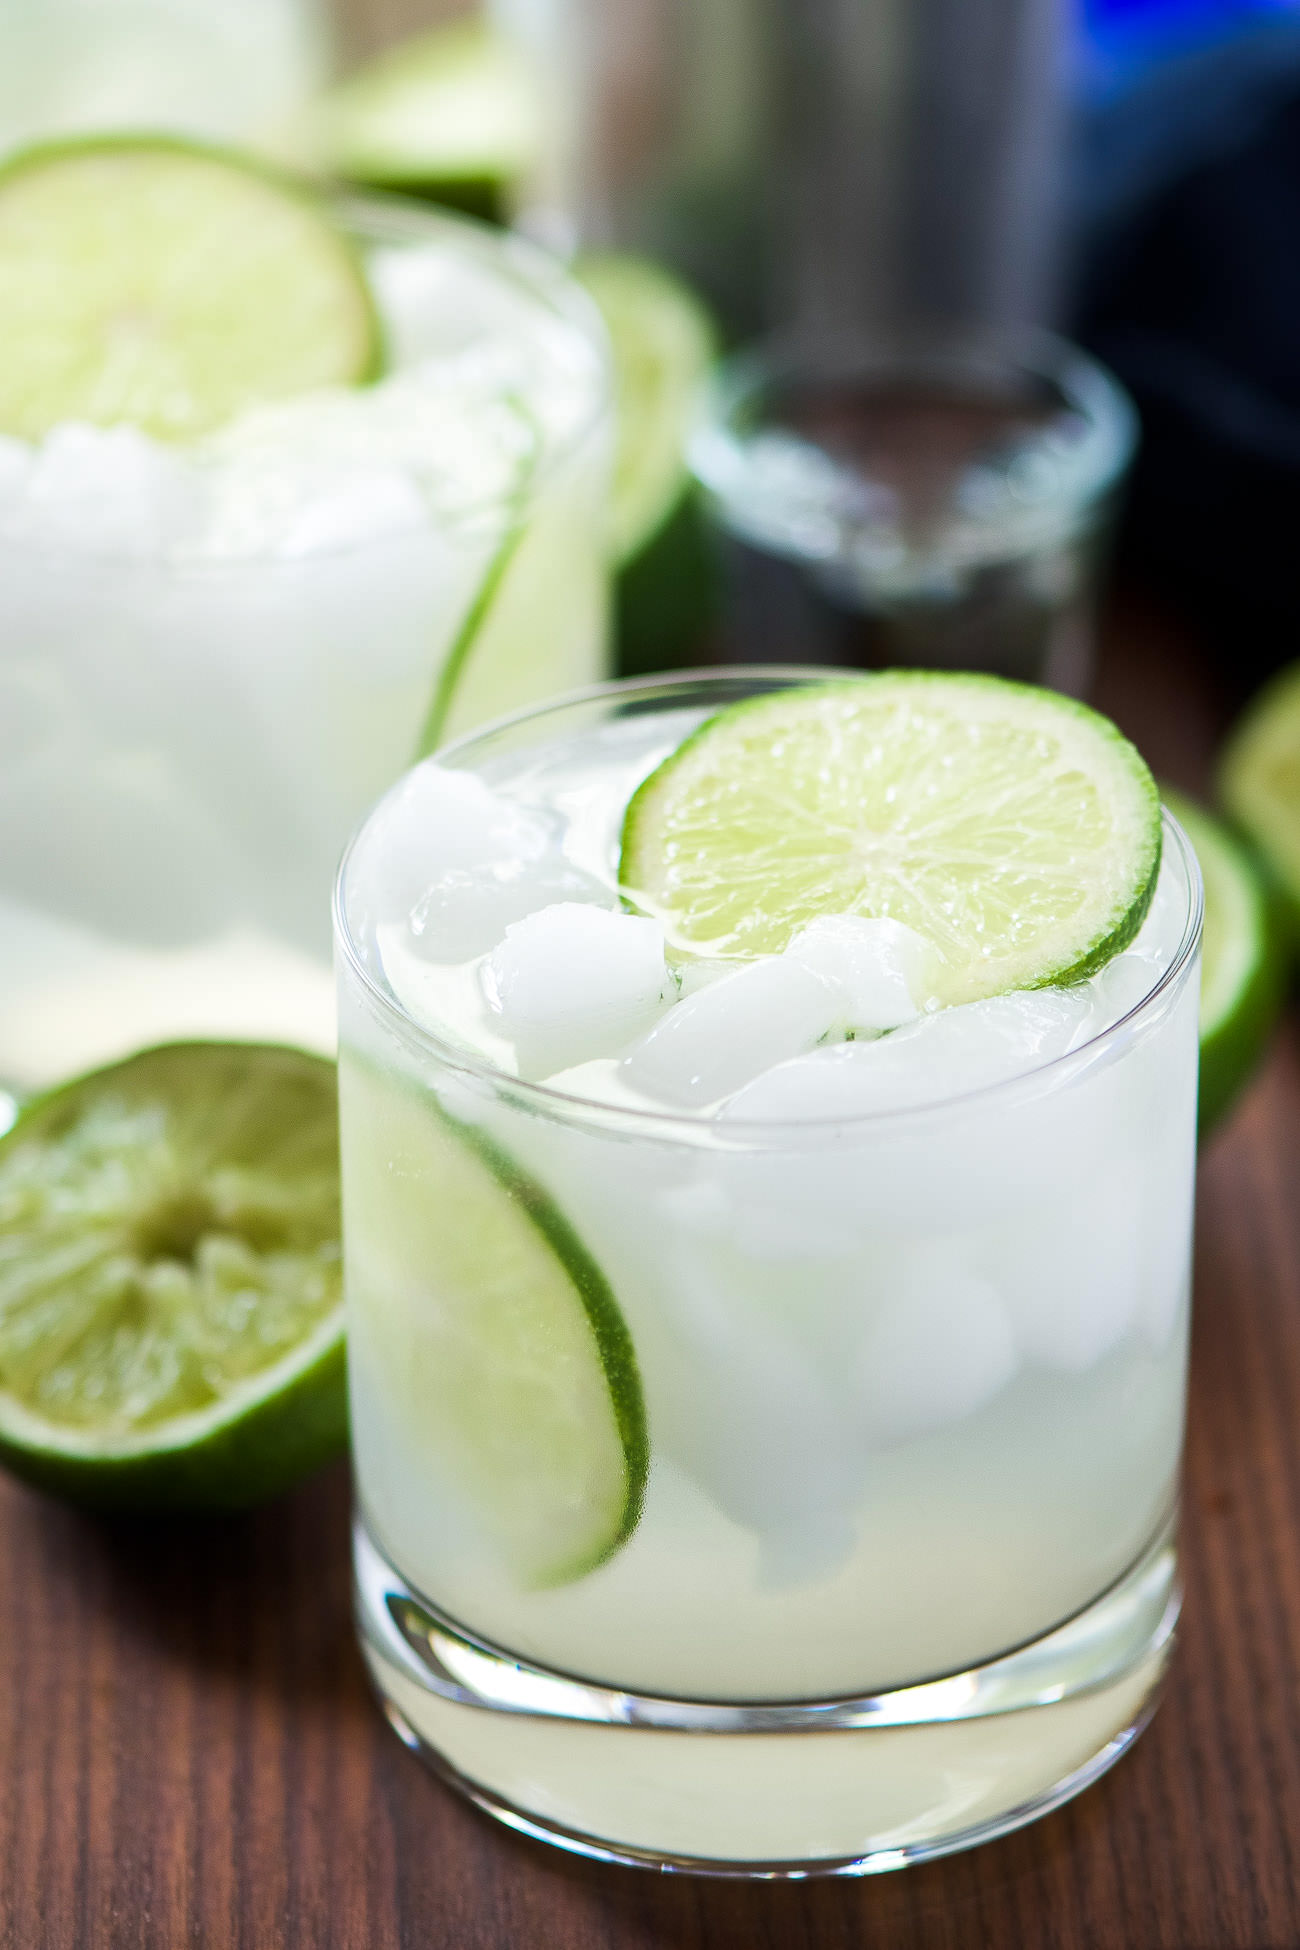 Skinny Champagne Margaritas combine two classic beverages in one bubbly drink! A light & refreshing margarita topped with champagne for an easy and fun twist on the classic!